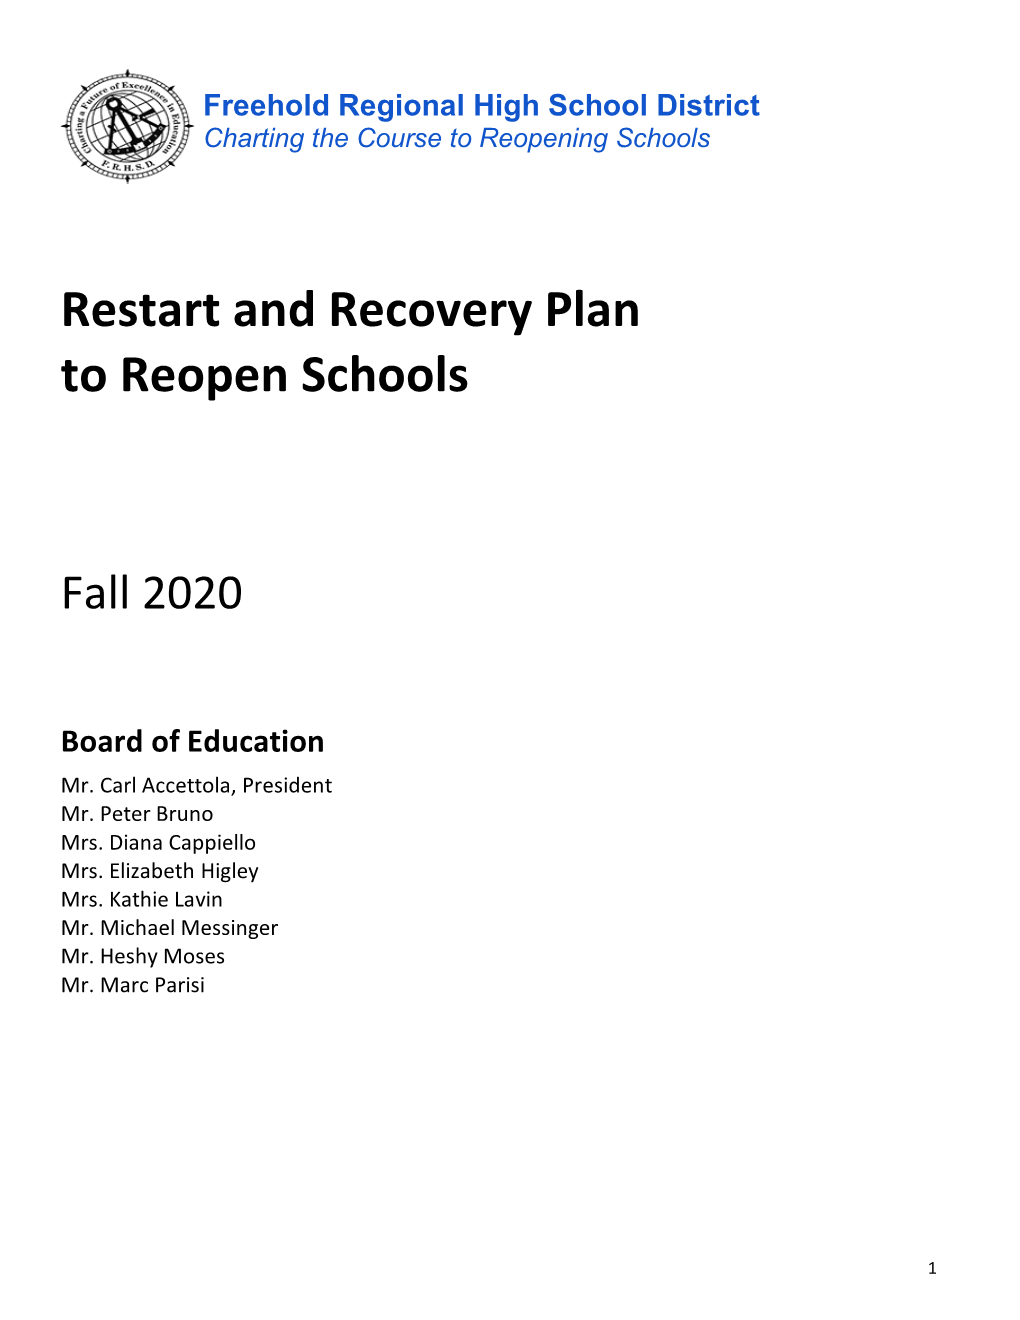 Restart and Recovery Plan to Reopen Schools